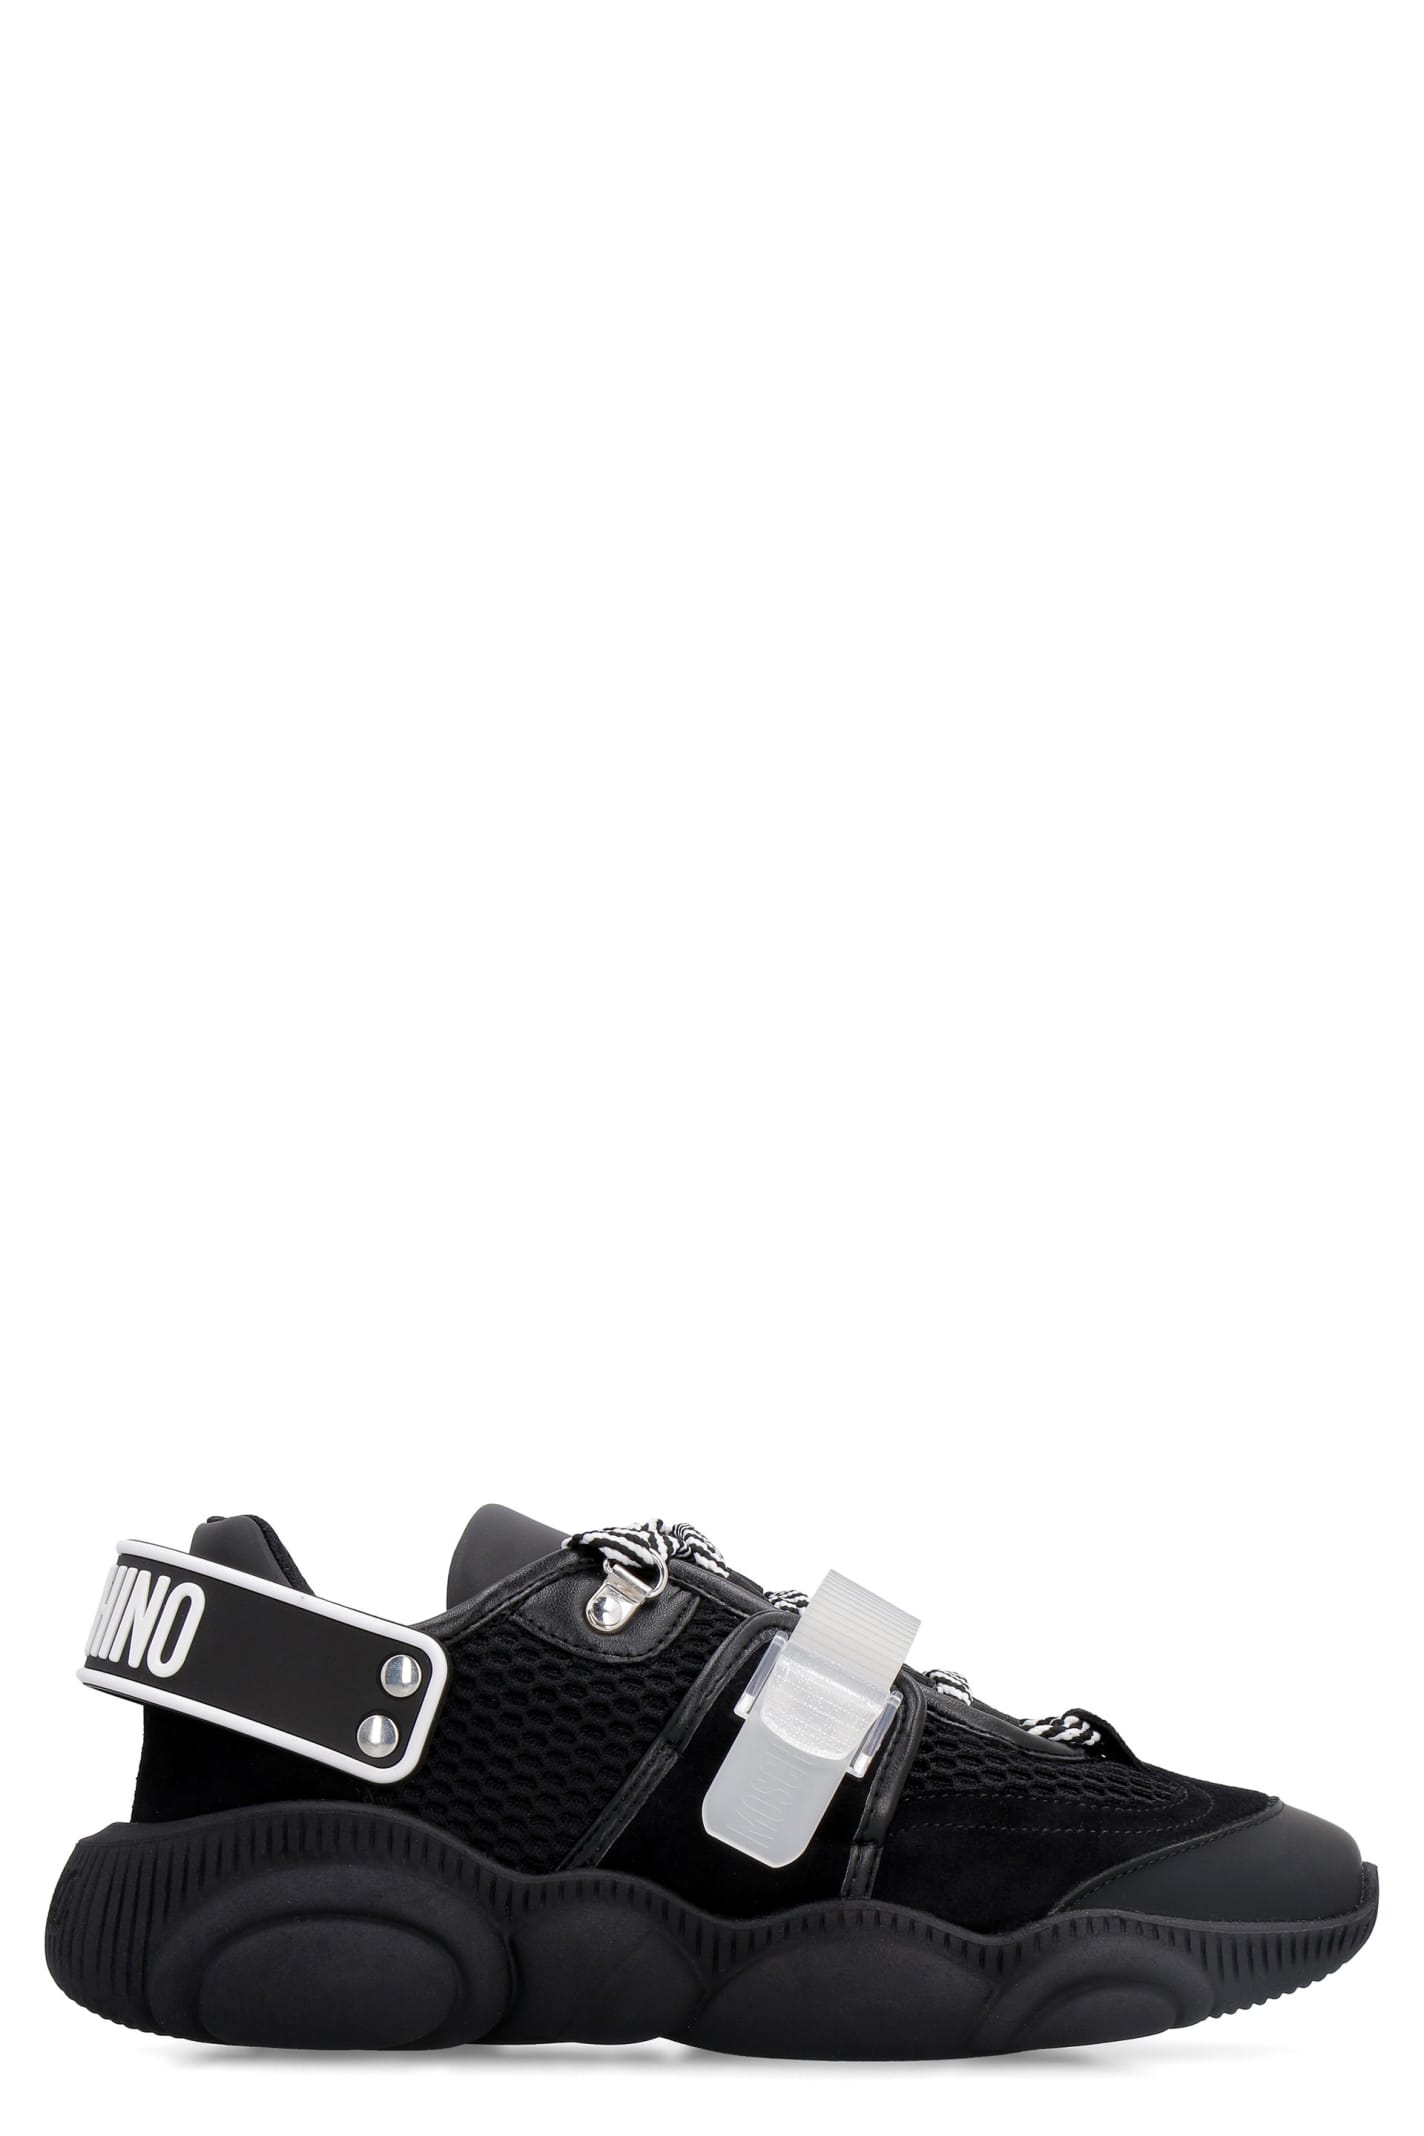 MOSCHINO TEDDY SHOES ROLLER SKATES MESH SNEAKERS,11215418